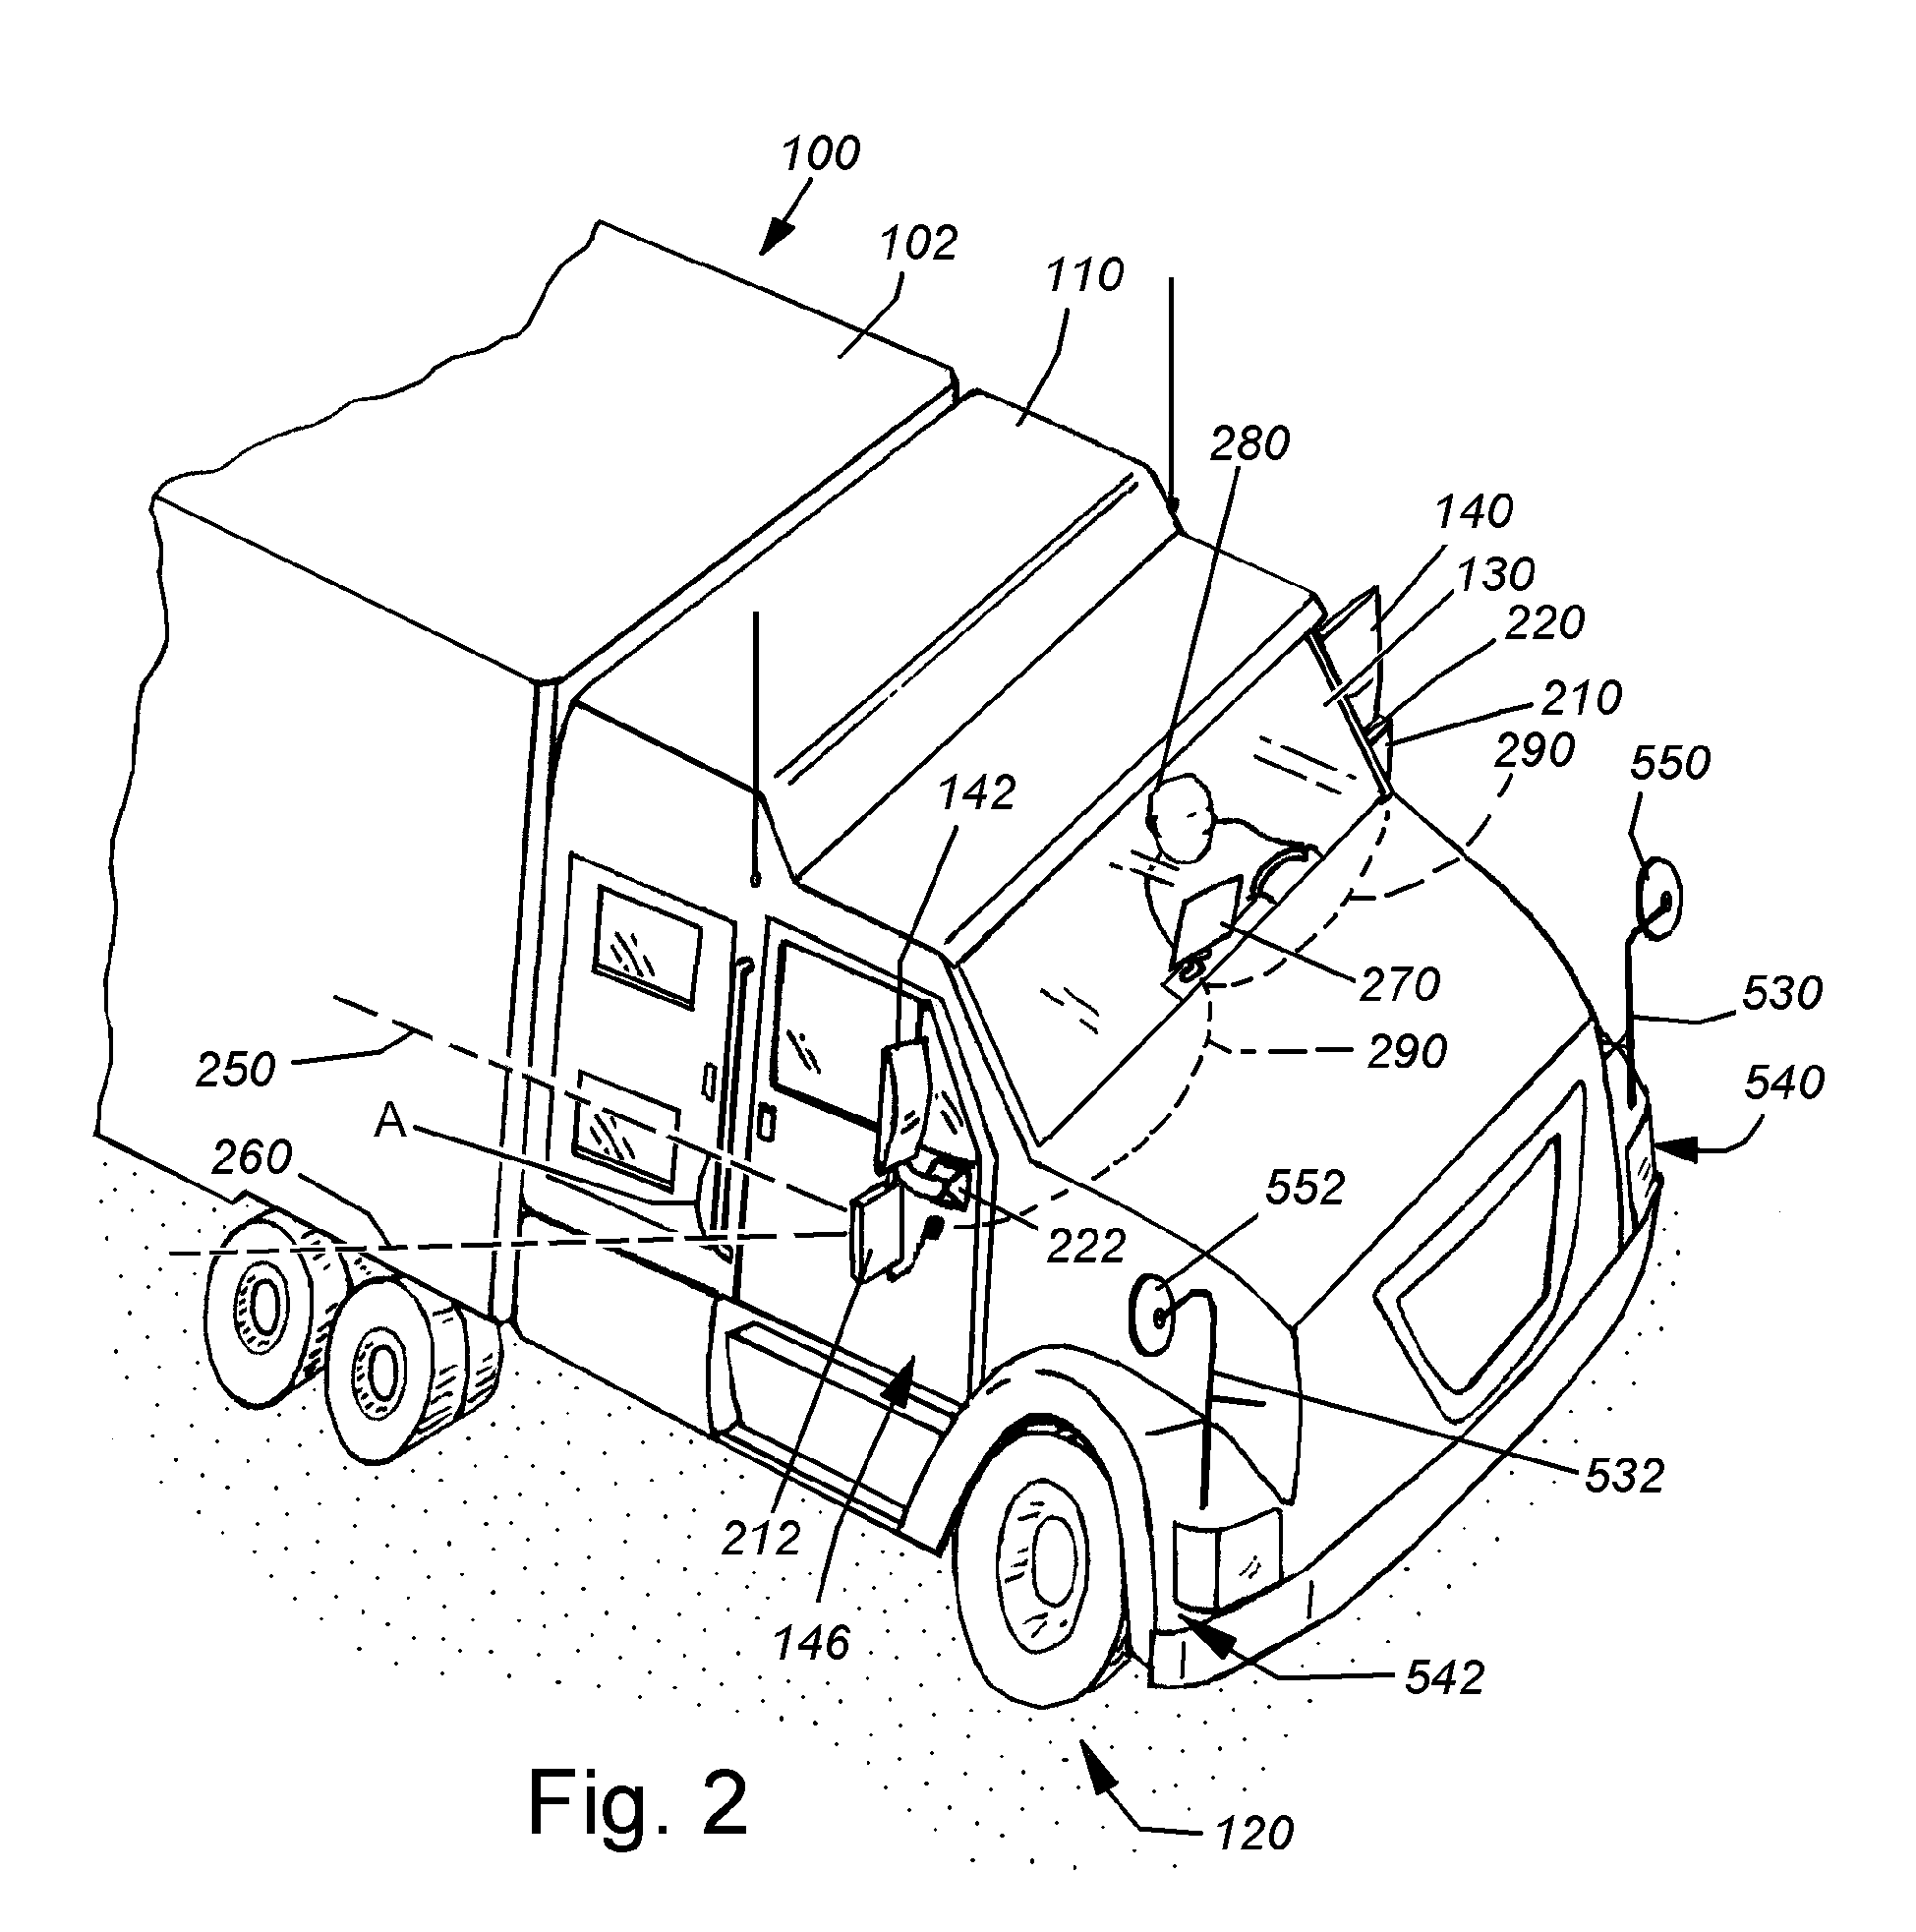 System and method for side vision detection of obstacles for vehicles